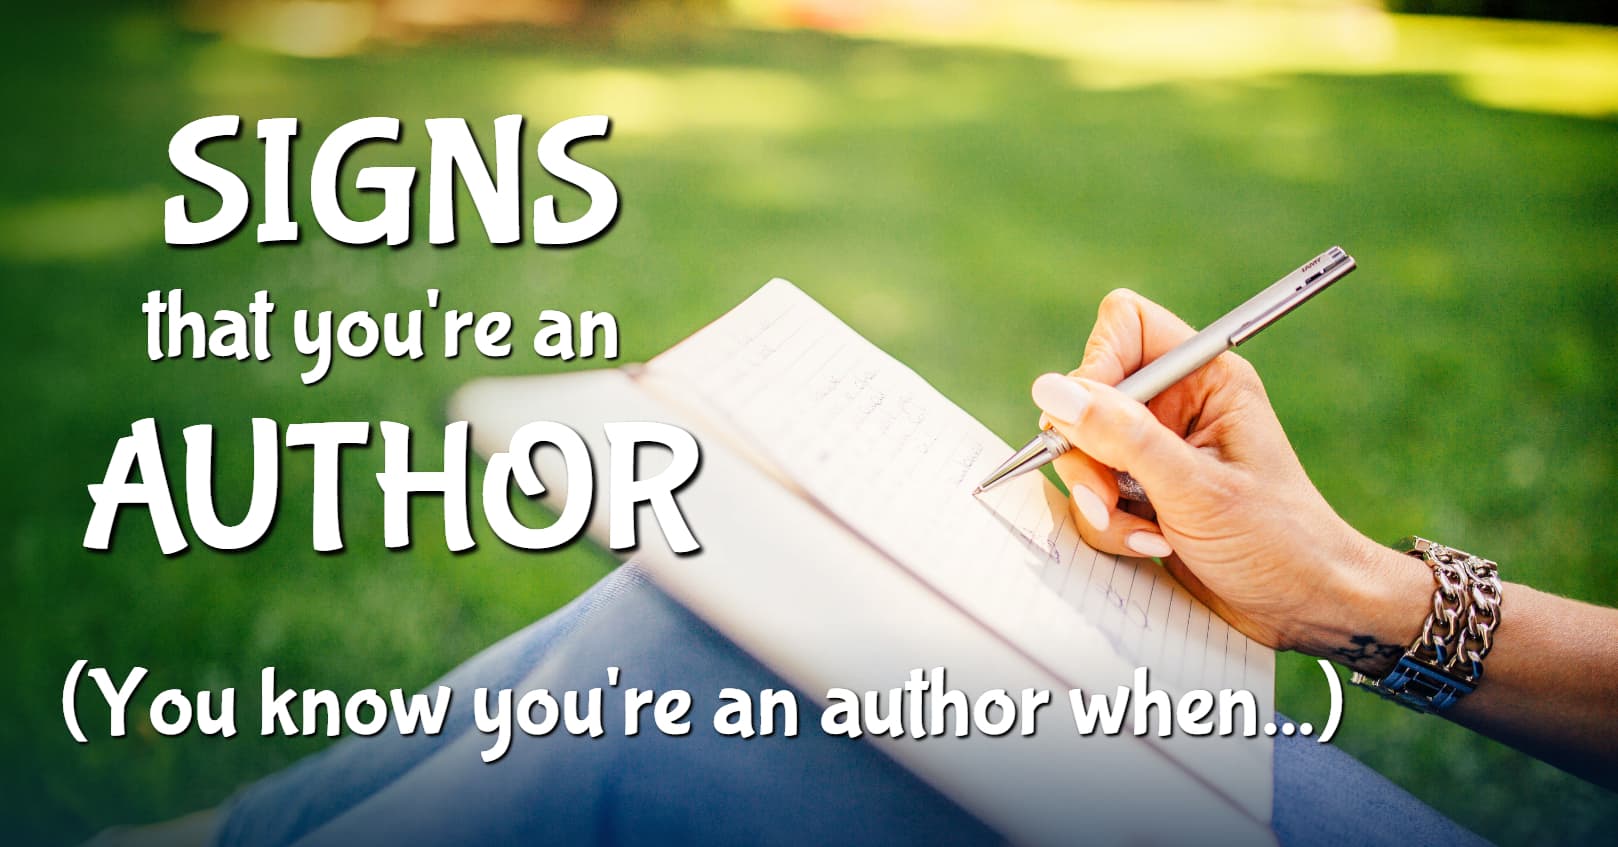 Signs that you're an author, you know you're an author if